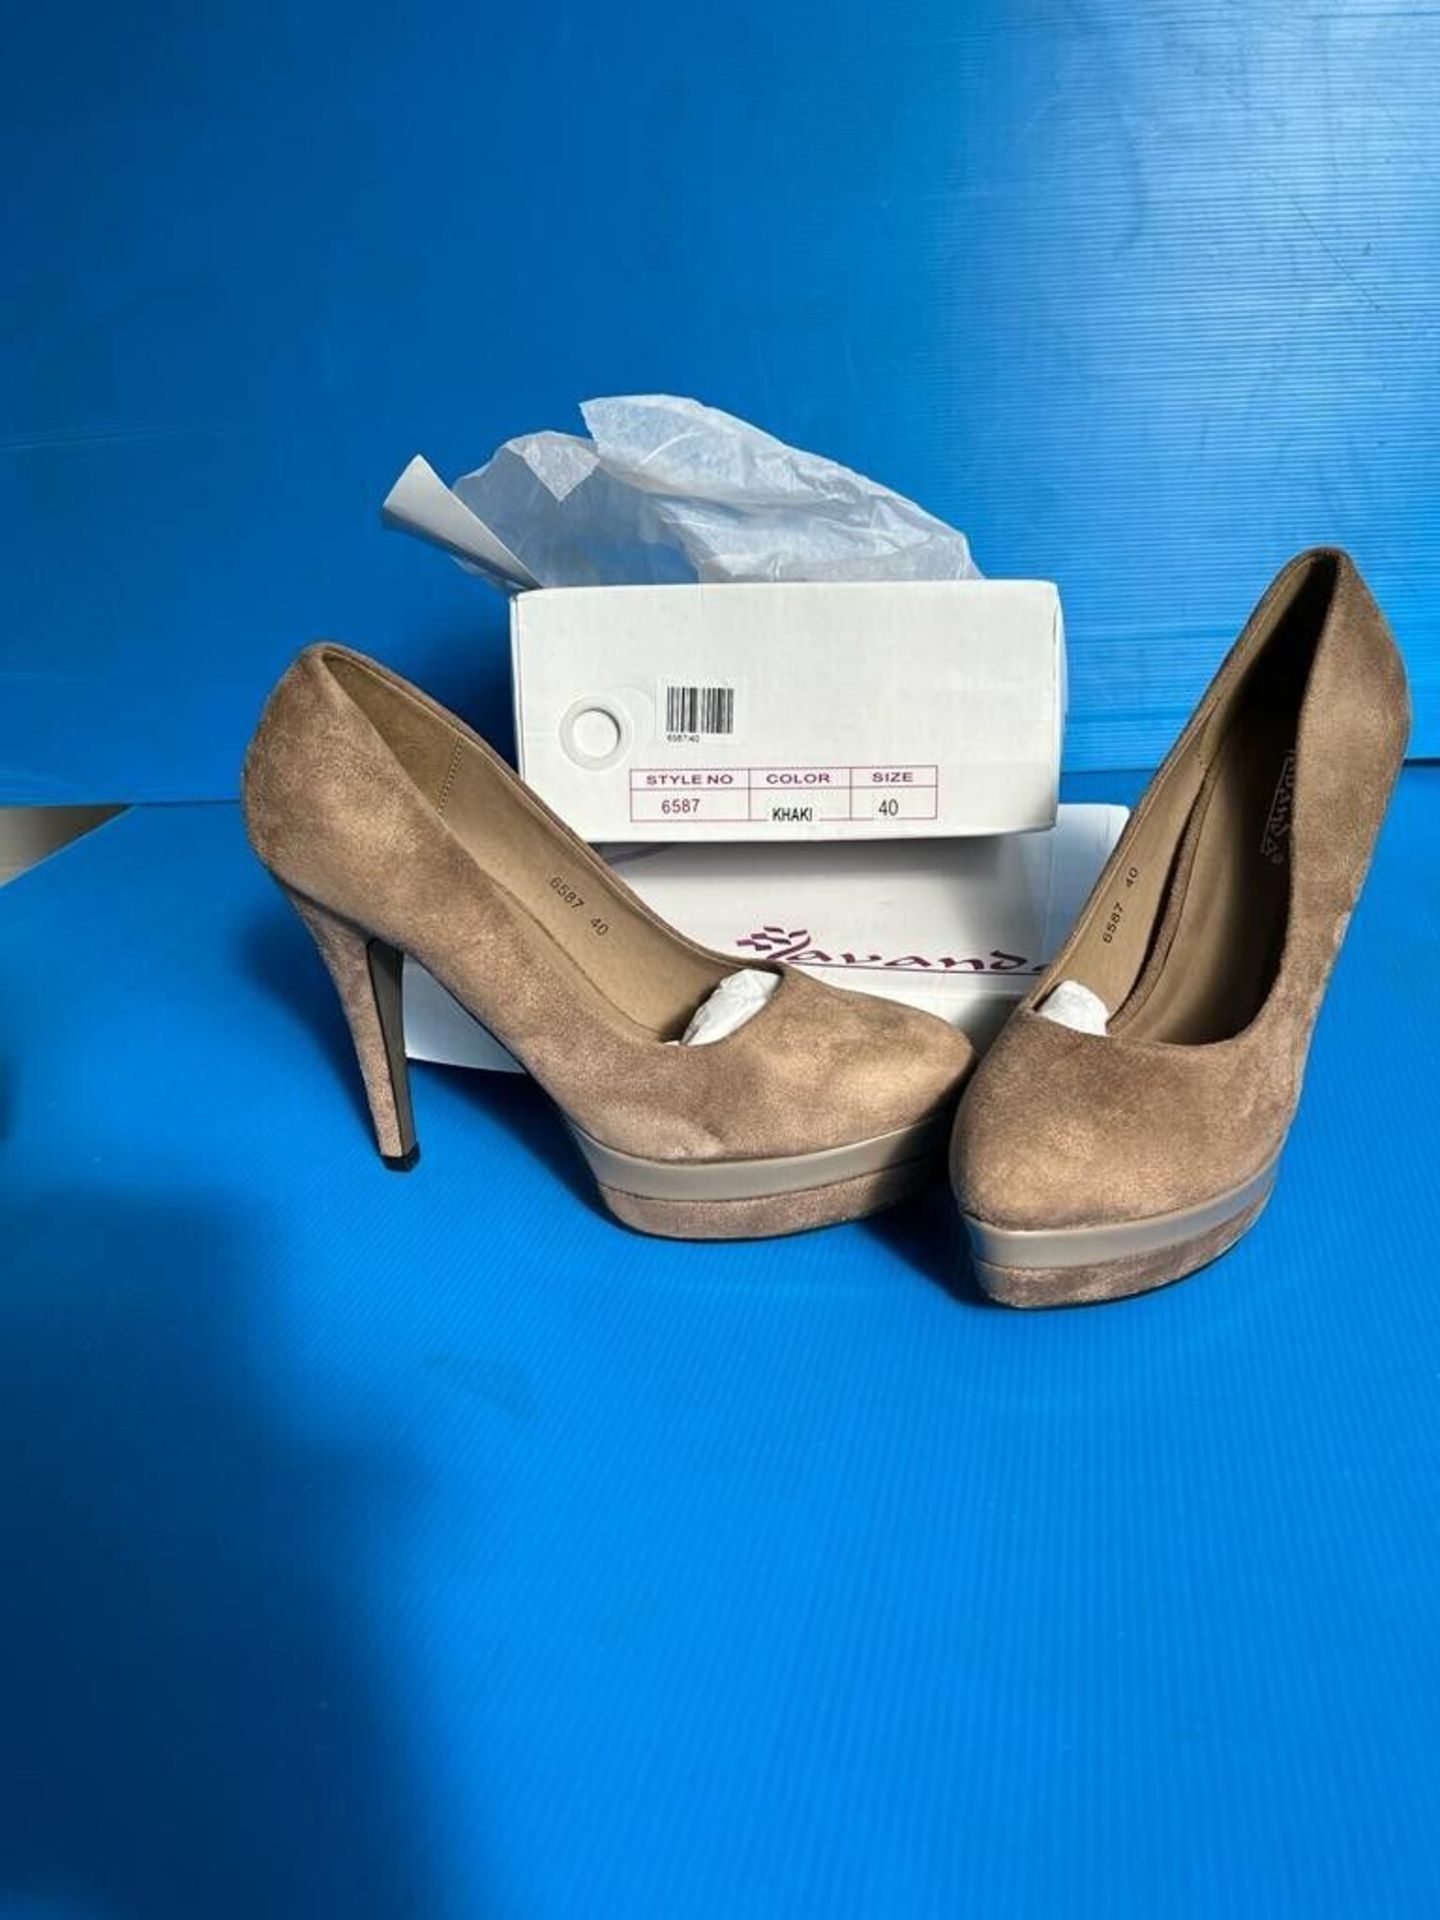 X100 BRAND NEW PAIRS WOMENS HIGH HEELS - MIXED STYLES AND SIZES RRP £3000 - Image 11 of 13